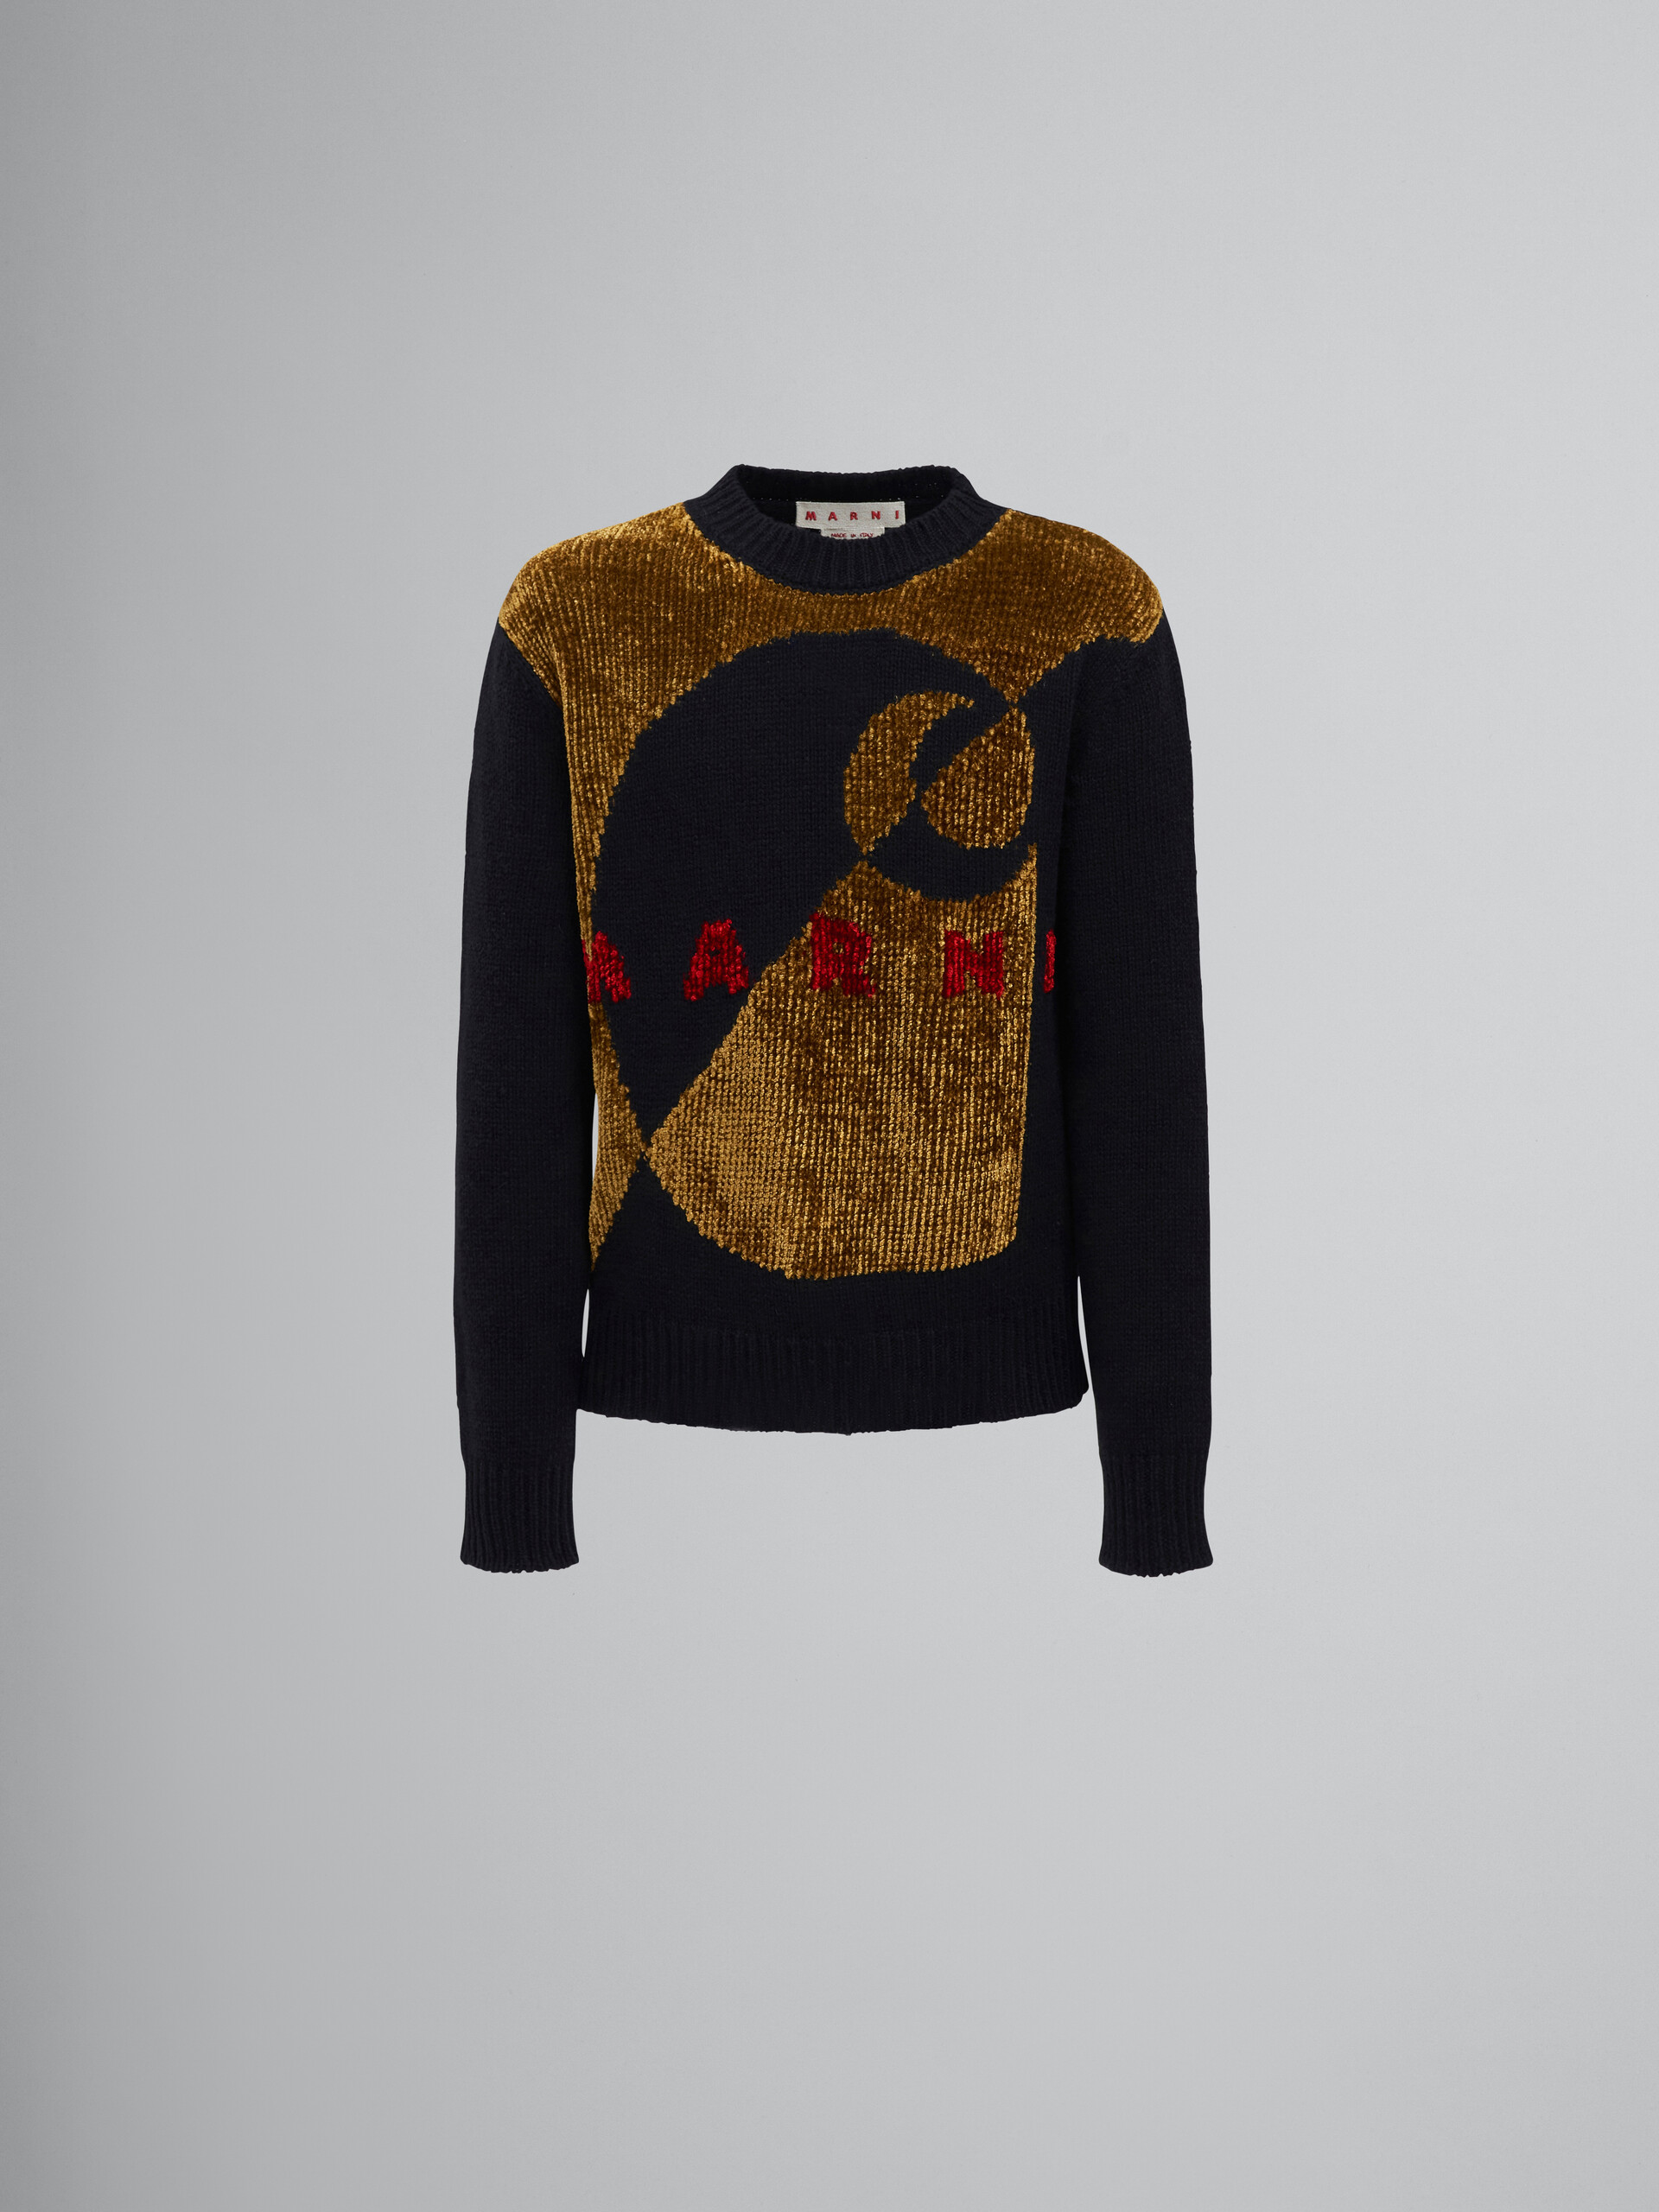 MARNI x CARHARTT WIP - Crewneck sweater in black wool and chenille with logo - Pullovers - Image 1